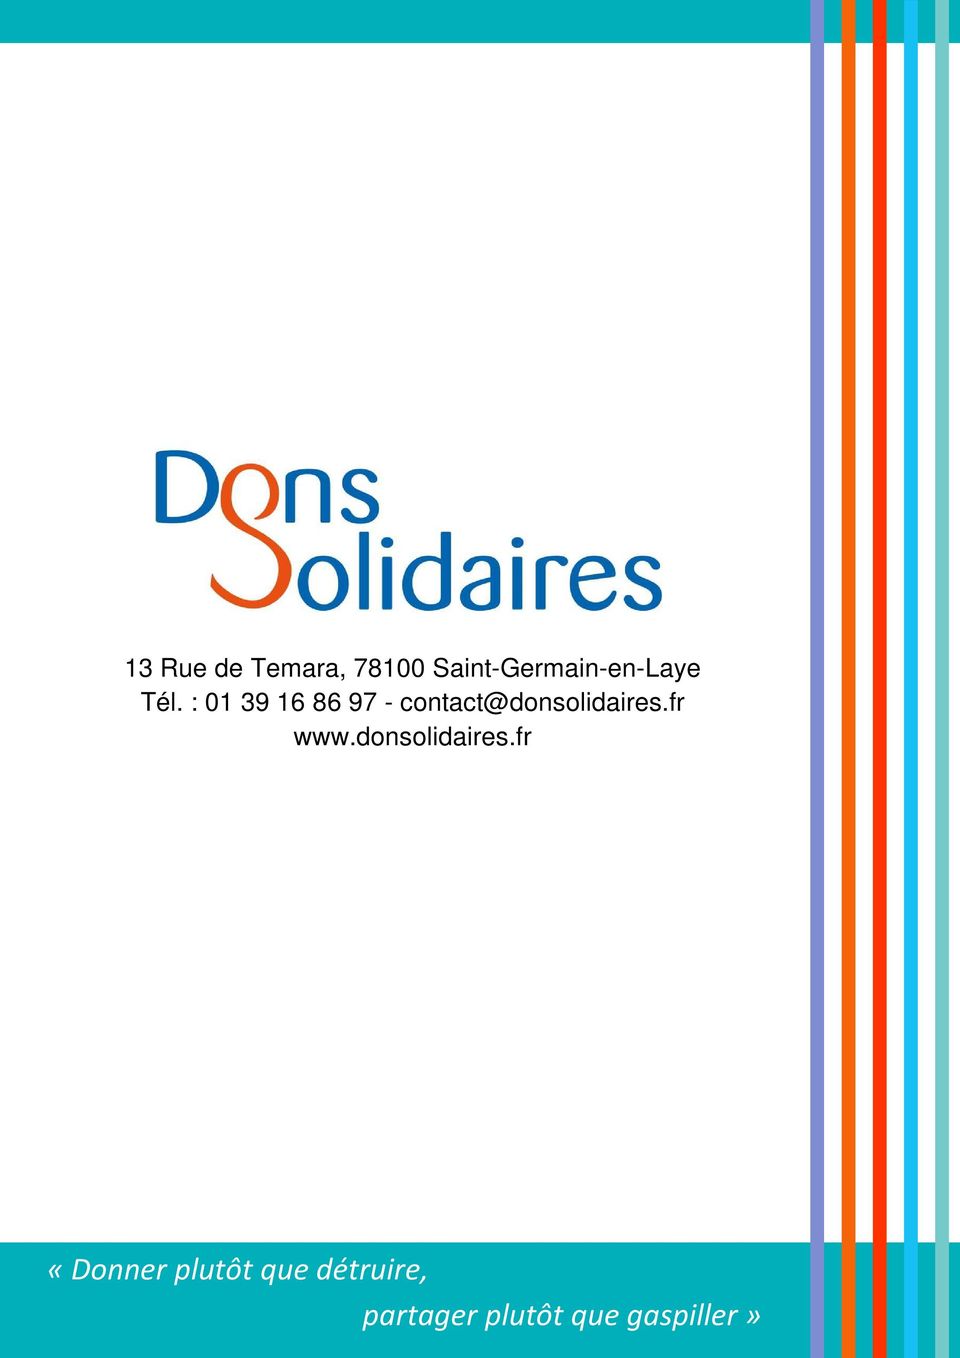 donsolidaires.